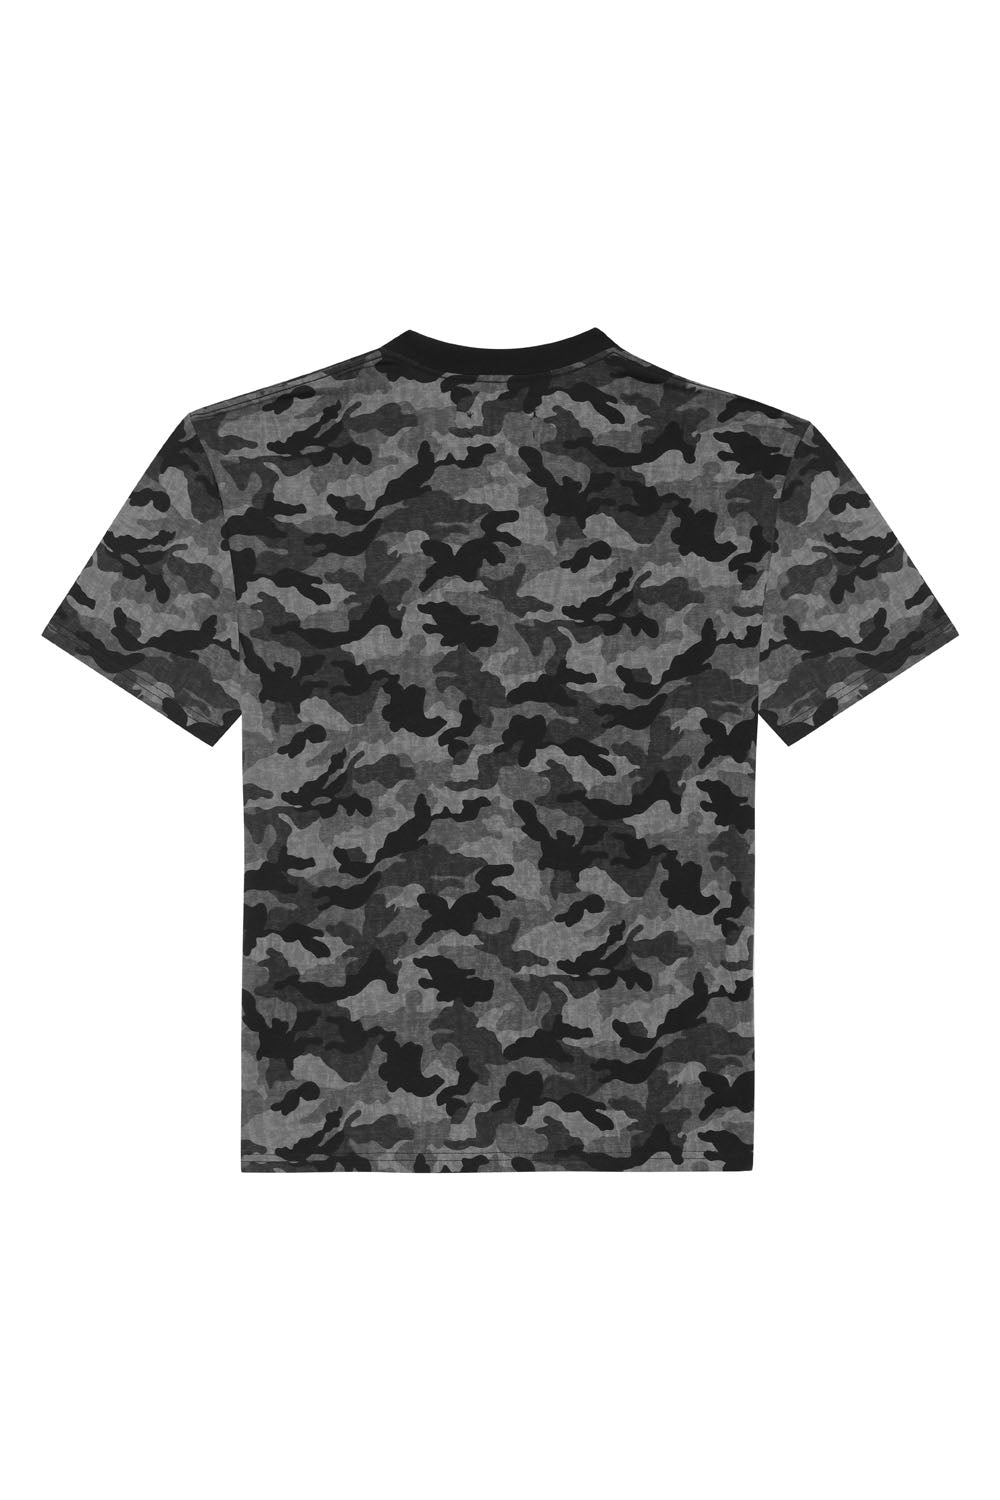 T-Shirt Slyde Army Silver